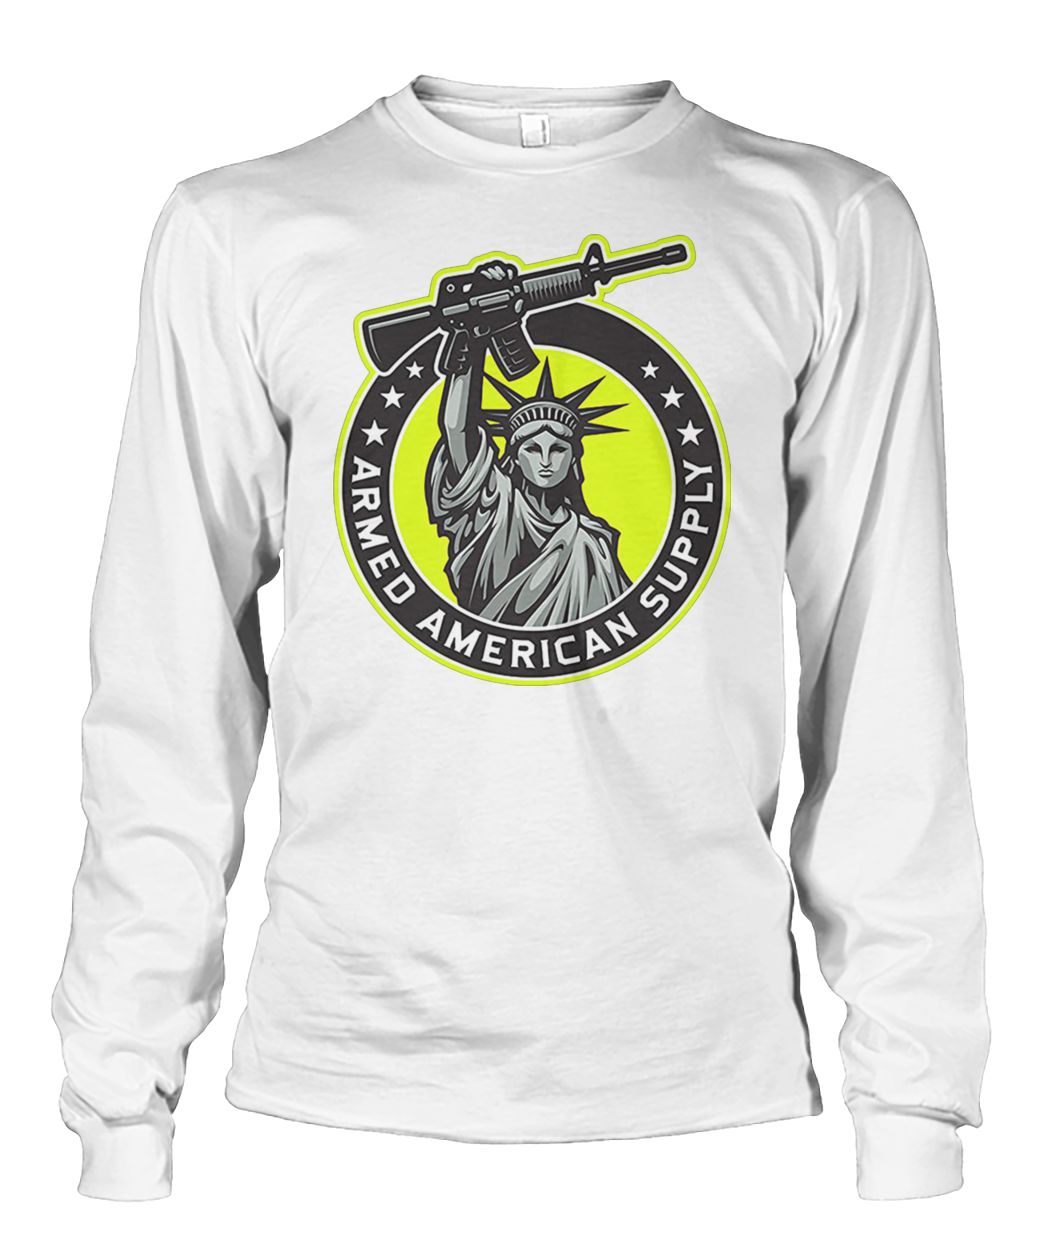 Statue of liberty holding gun armed american supply unisex long sleeve